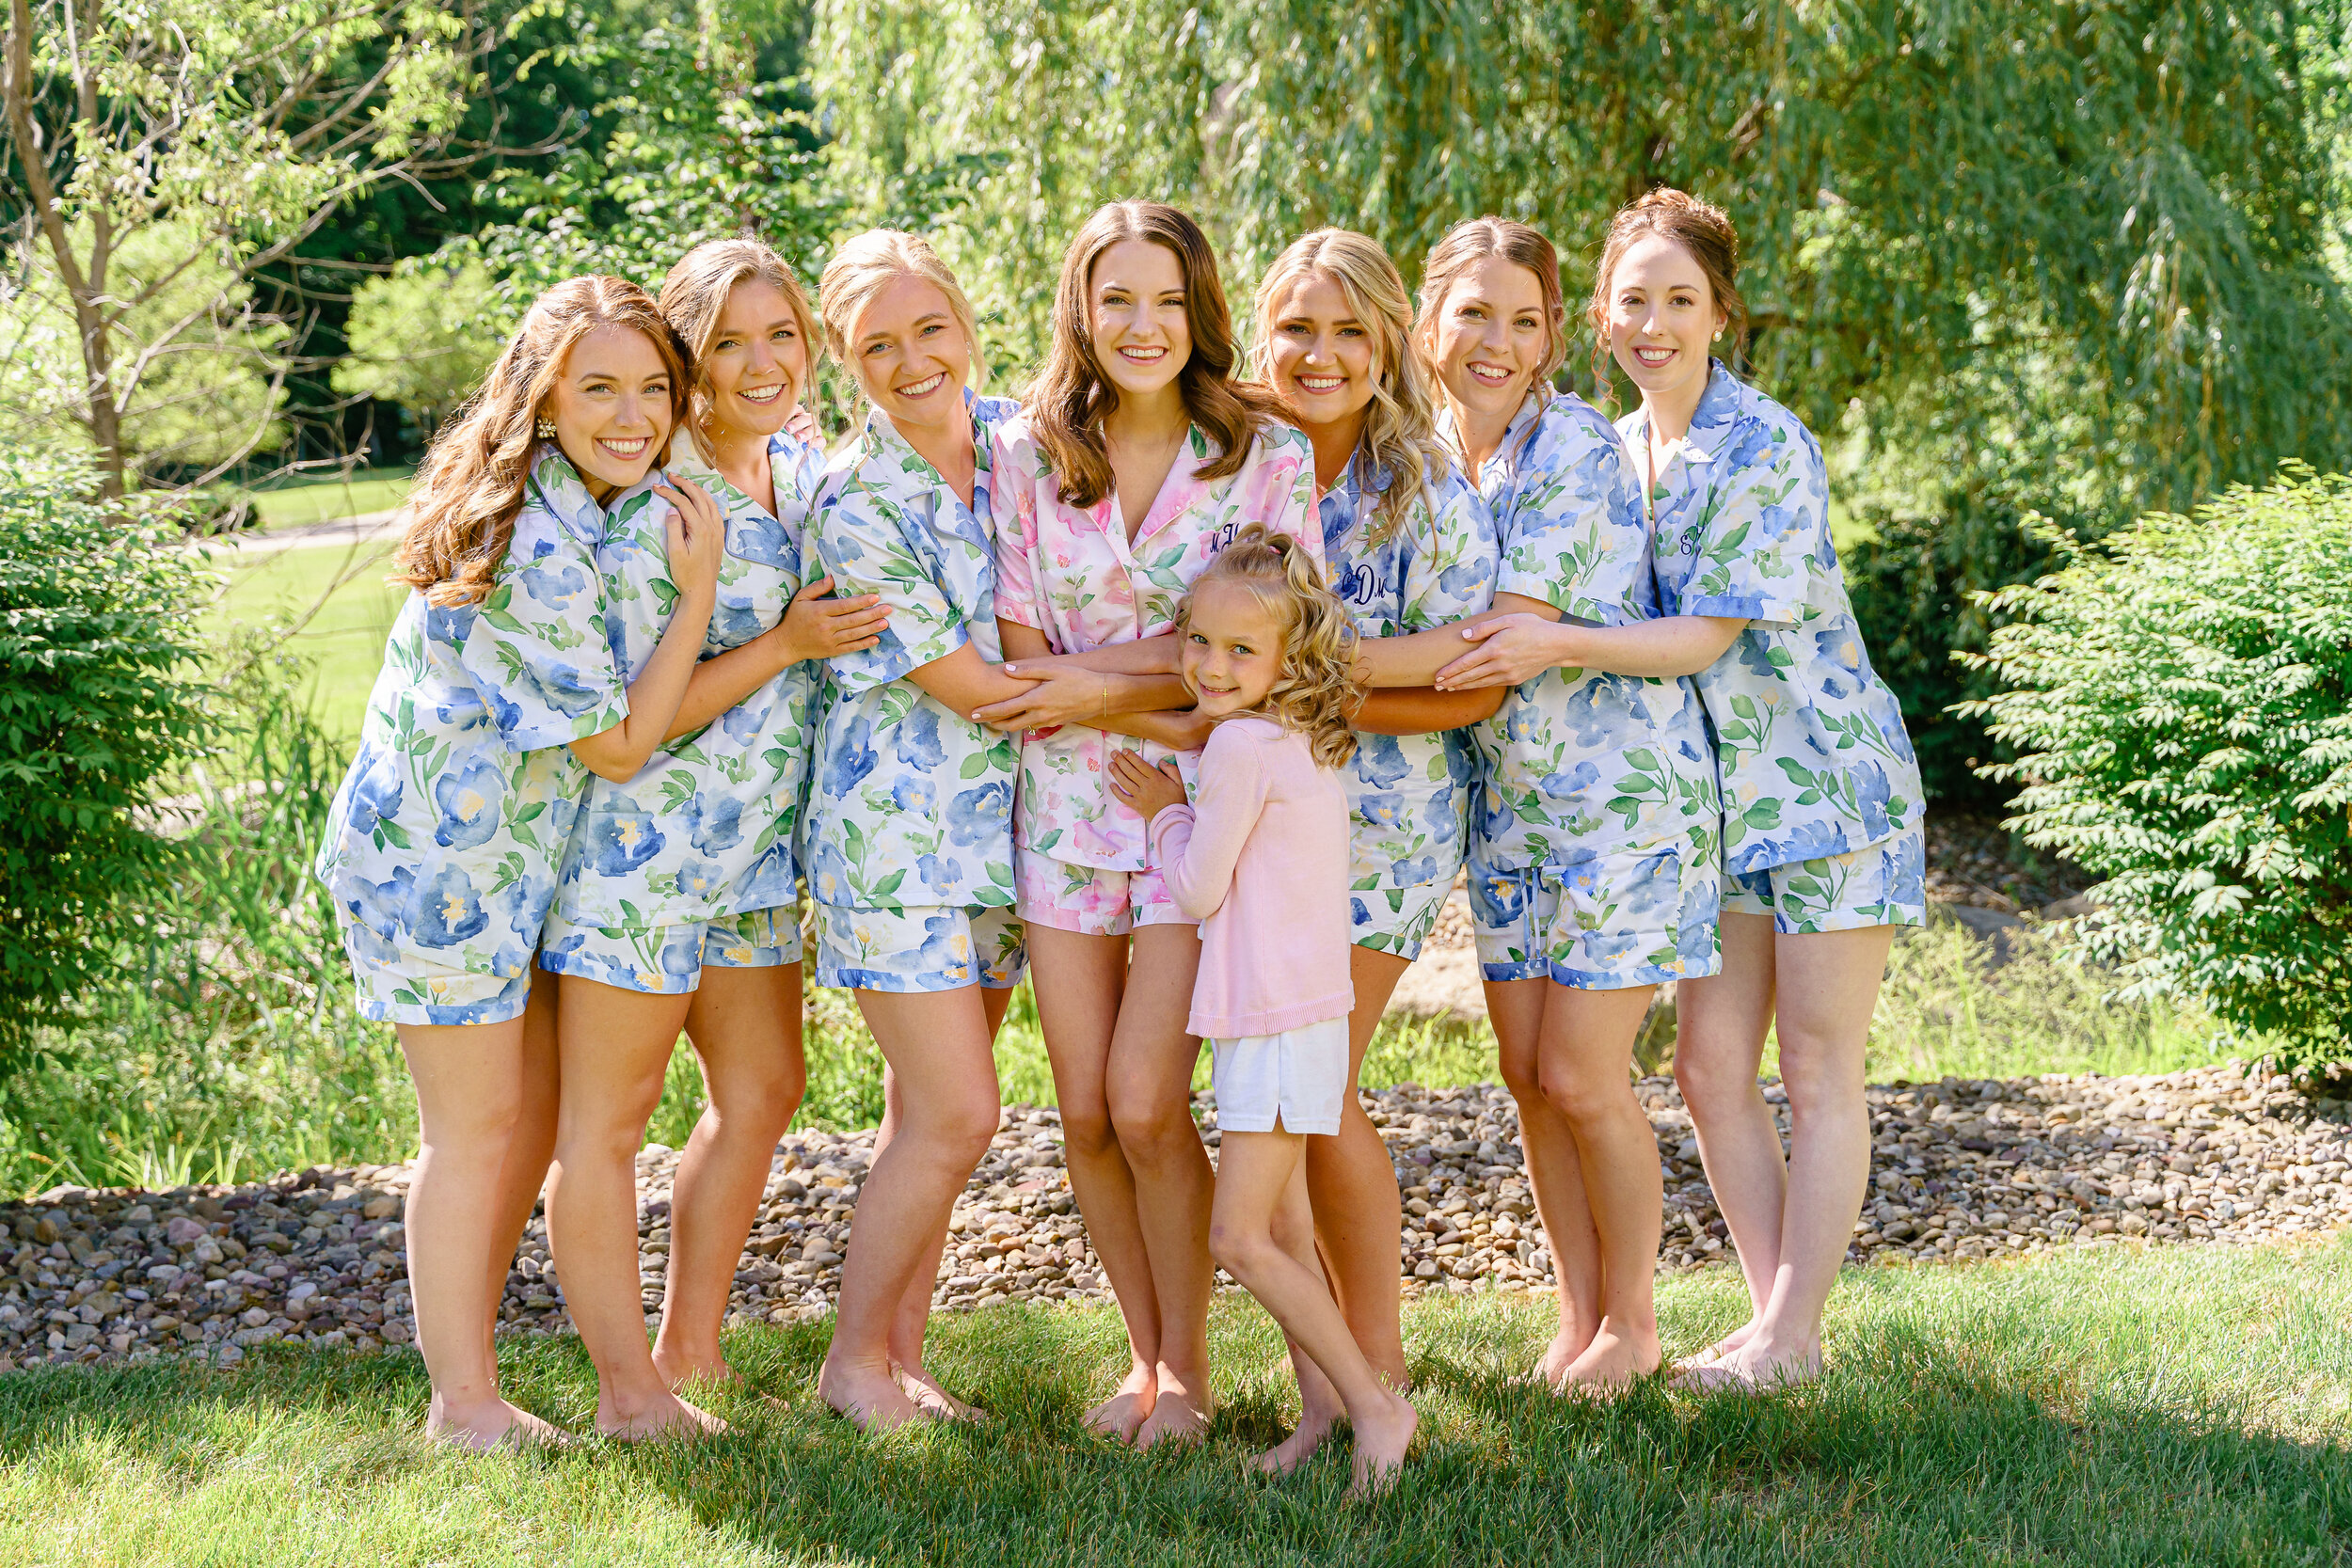 Classic and sweet bridesmaids in matching floral pj's